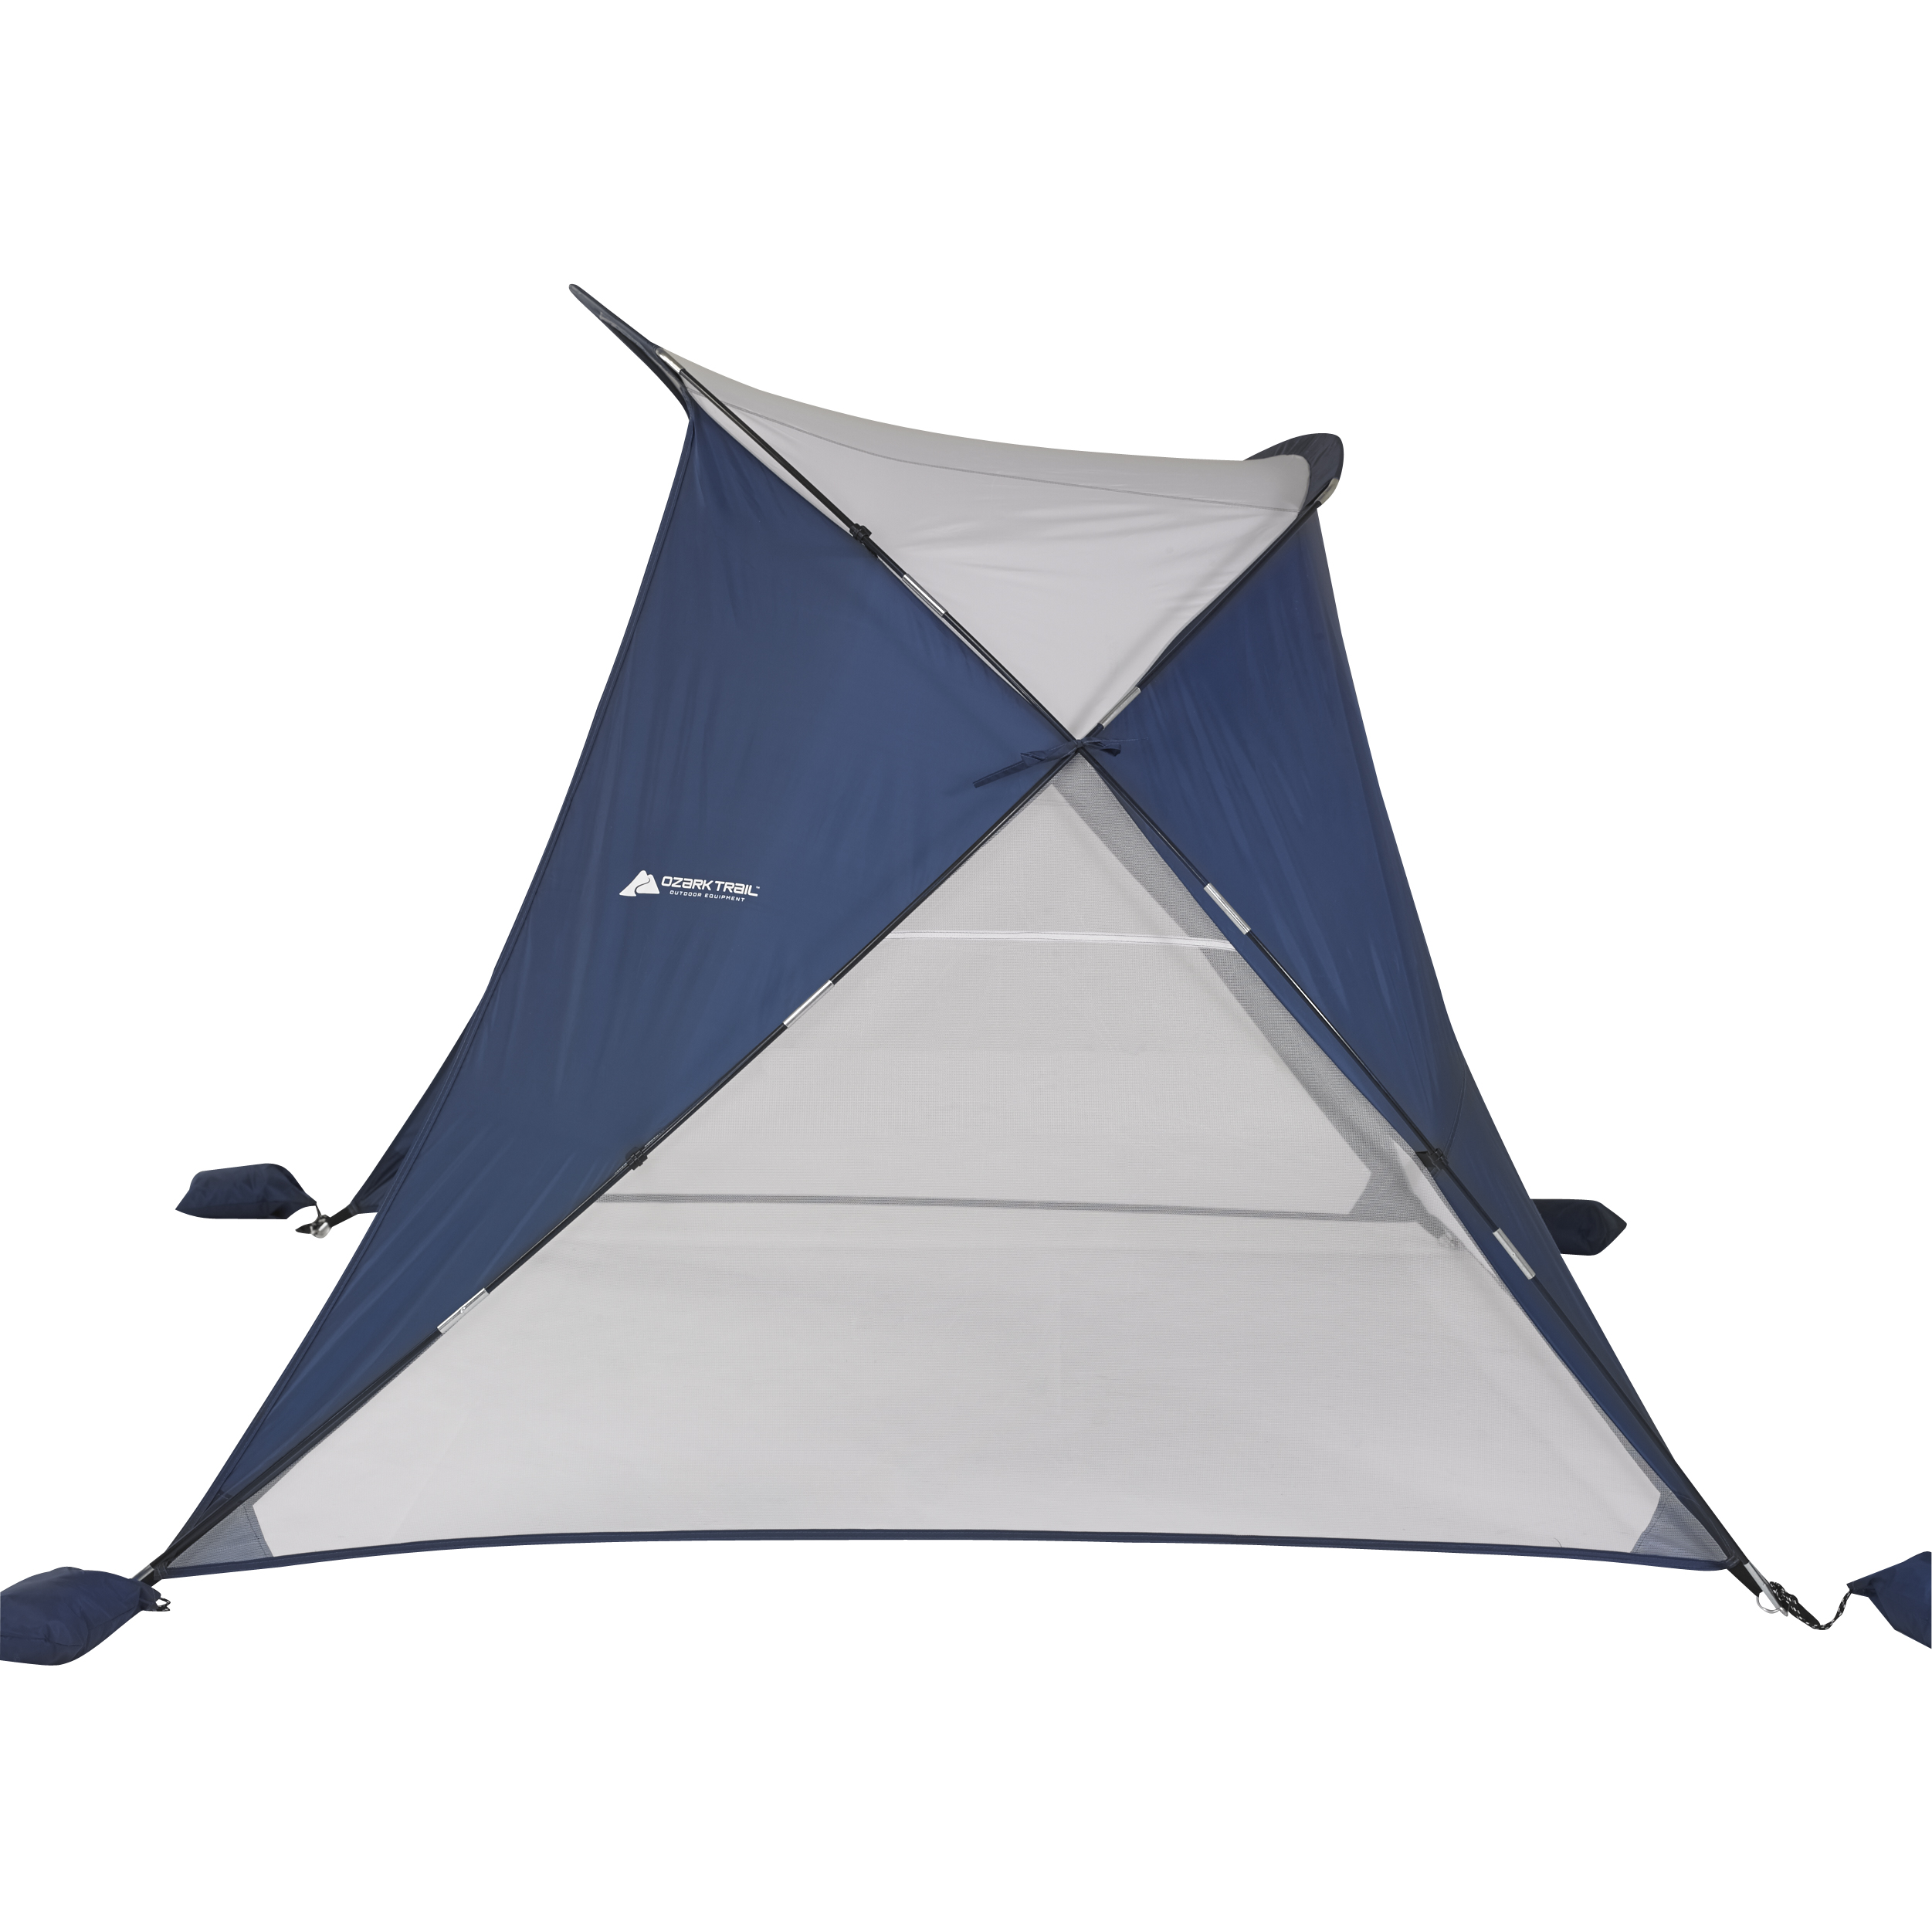 Ozark Trail 8 ft. x 6 ft. Portable Sun Shelter Beach Tent, with UV Protection - image 4 of 4